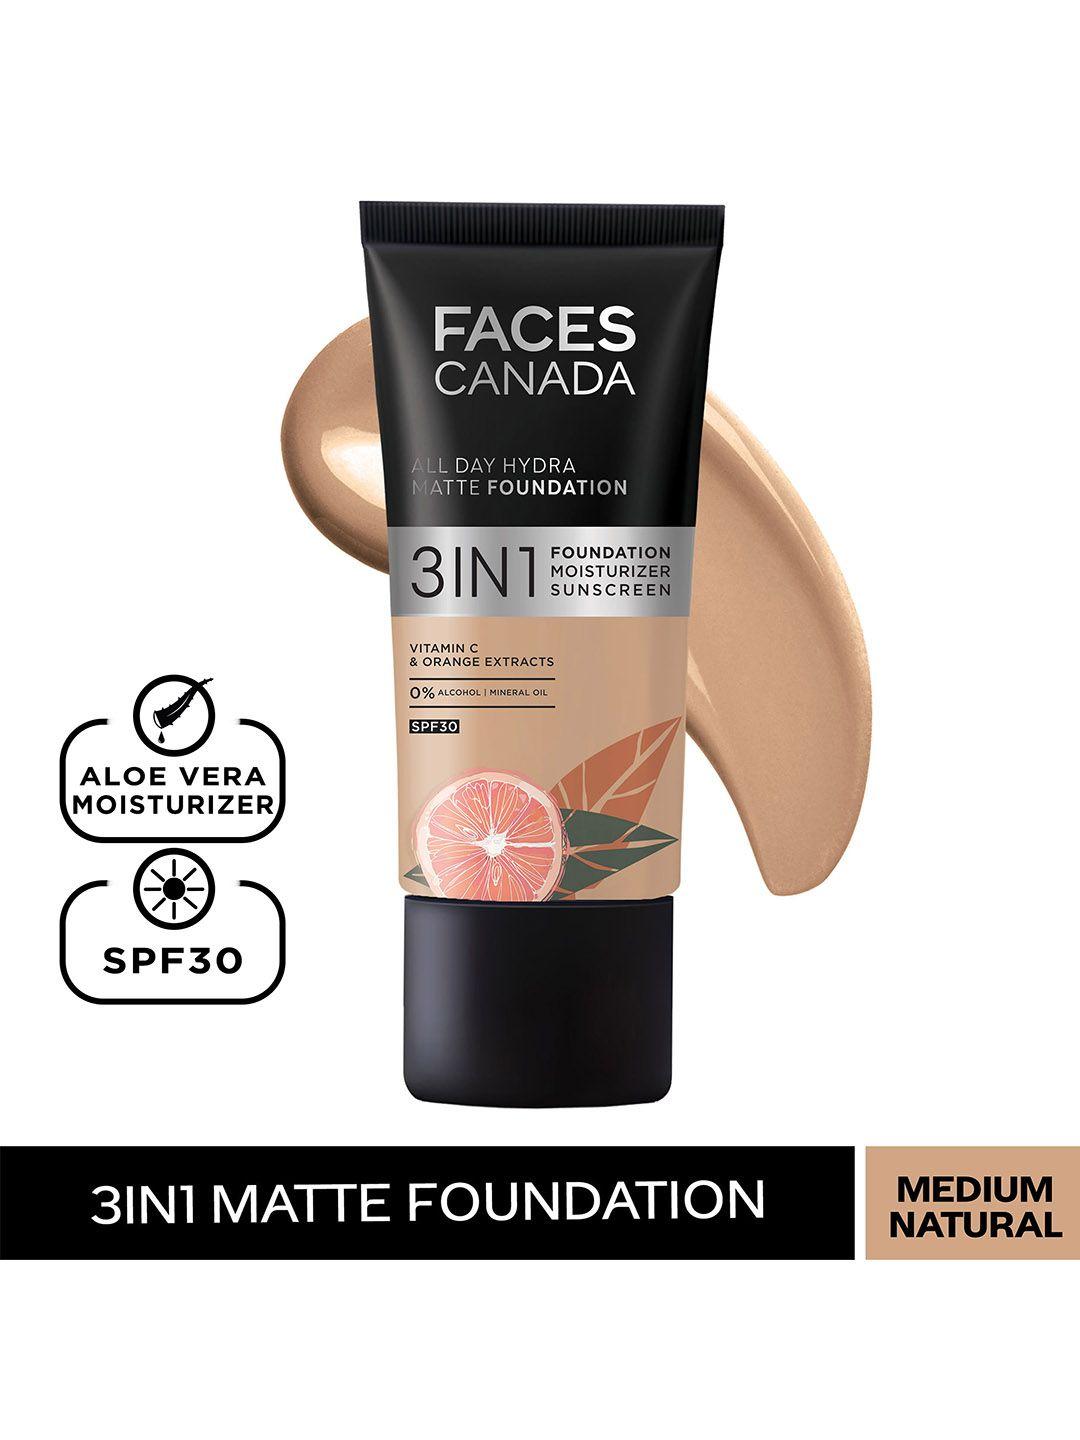 faces canada 3-in-1 all day hydra matte spf30 foundation 25ml - medium natural 022